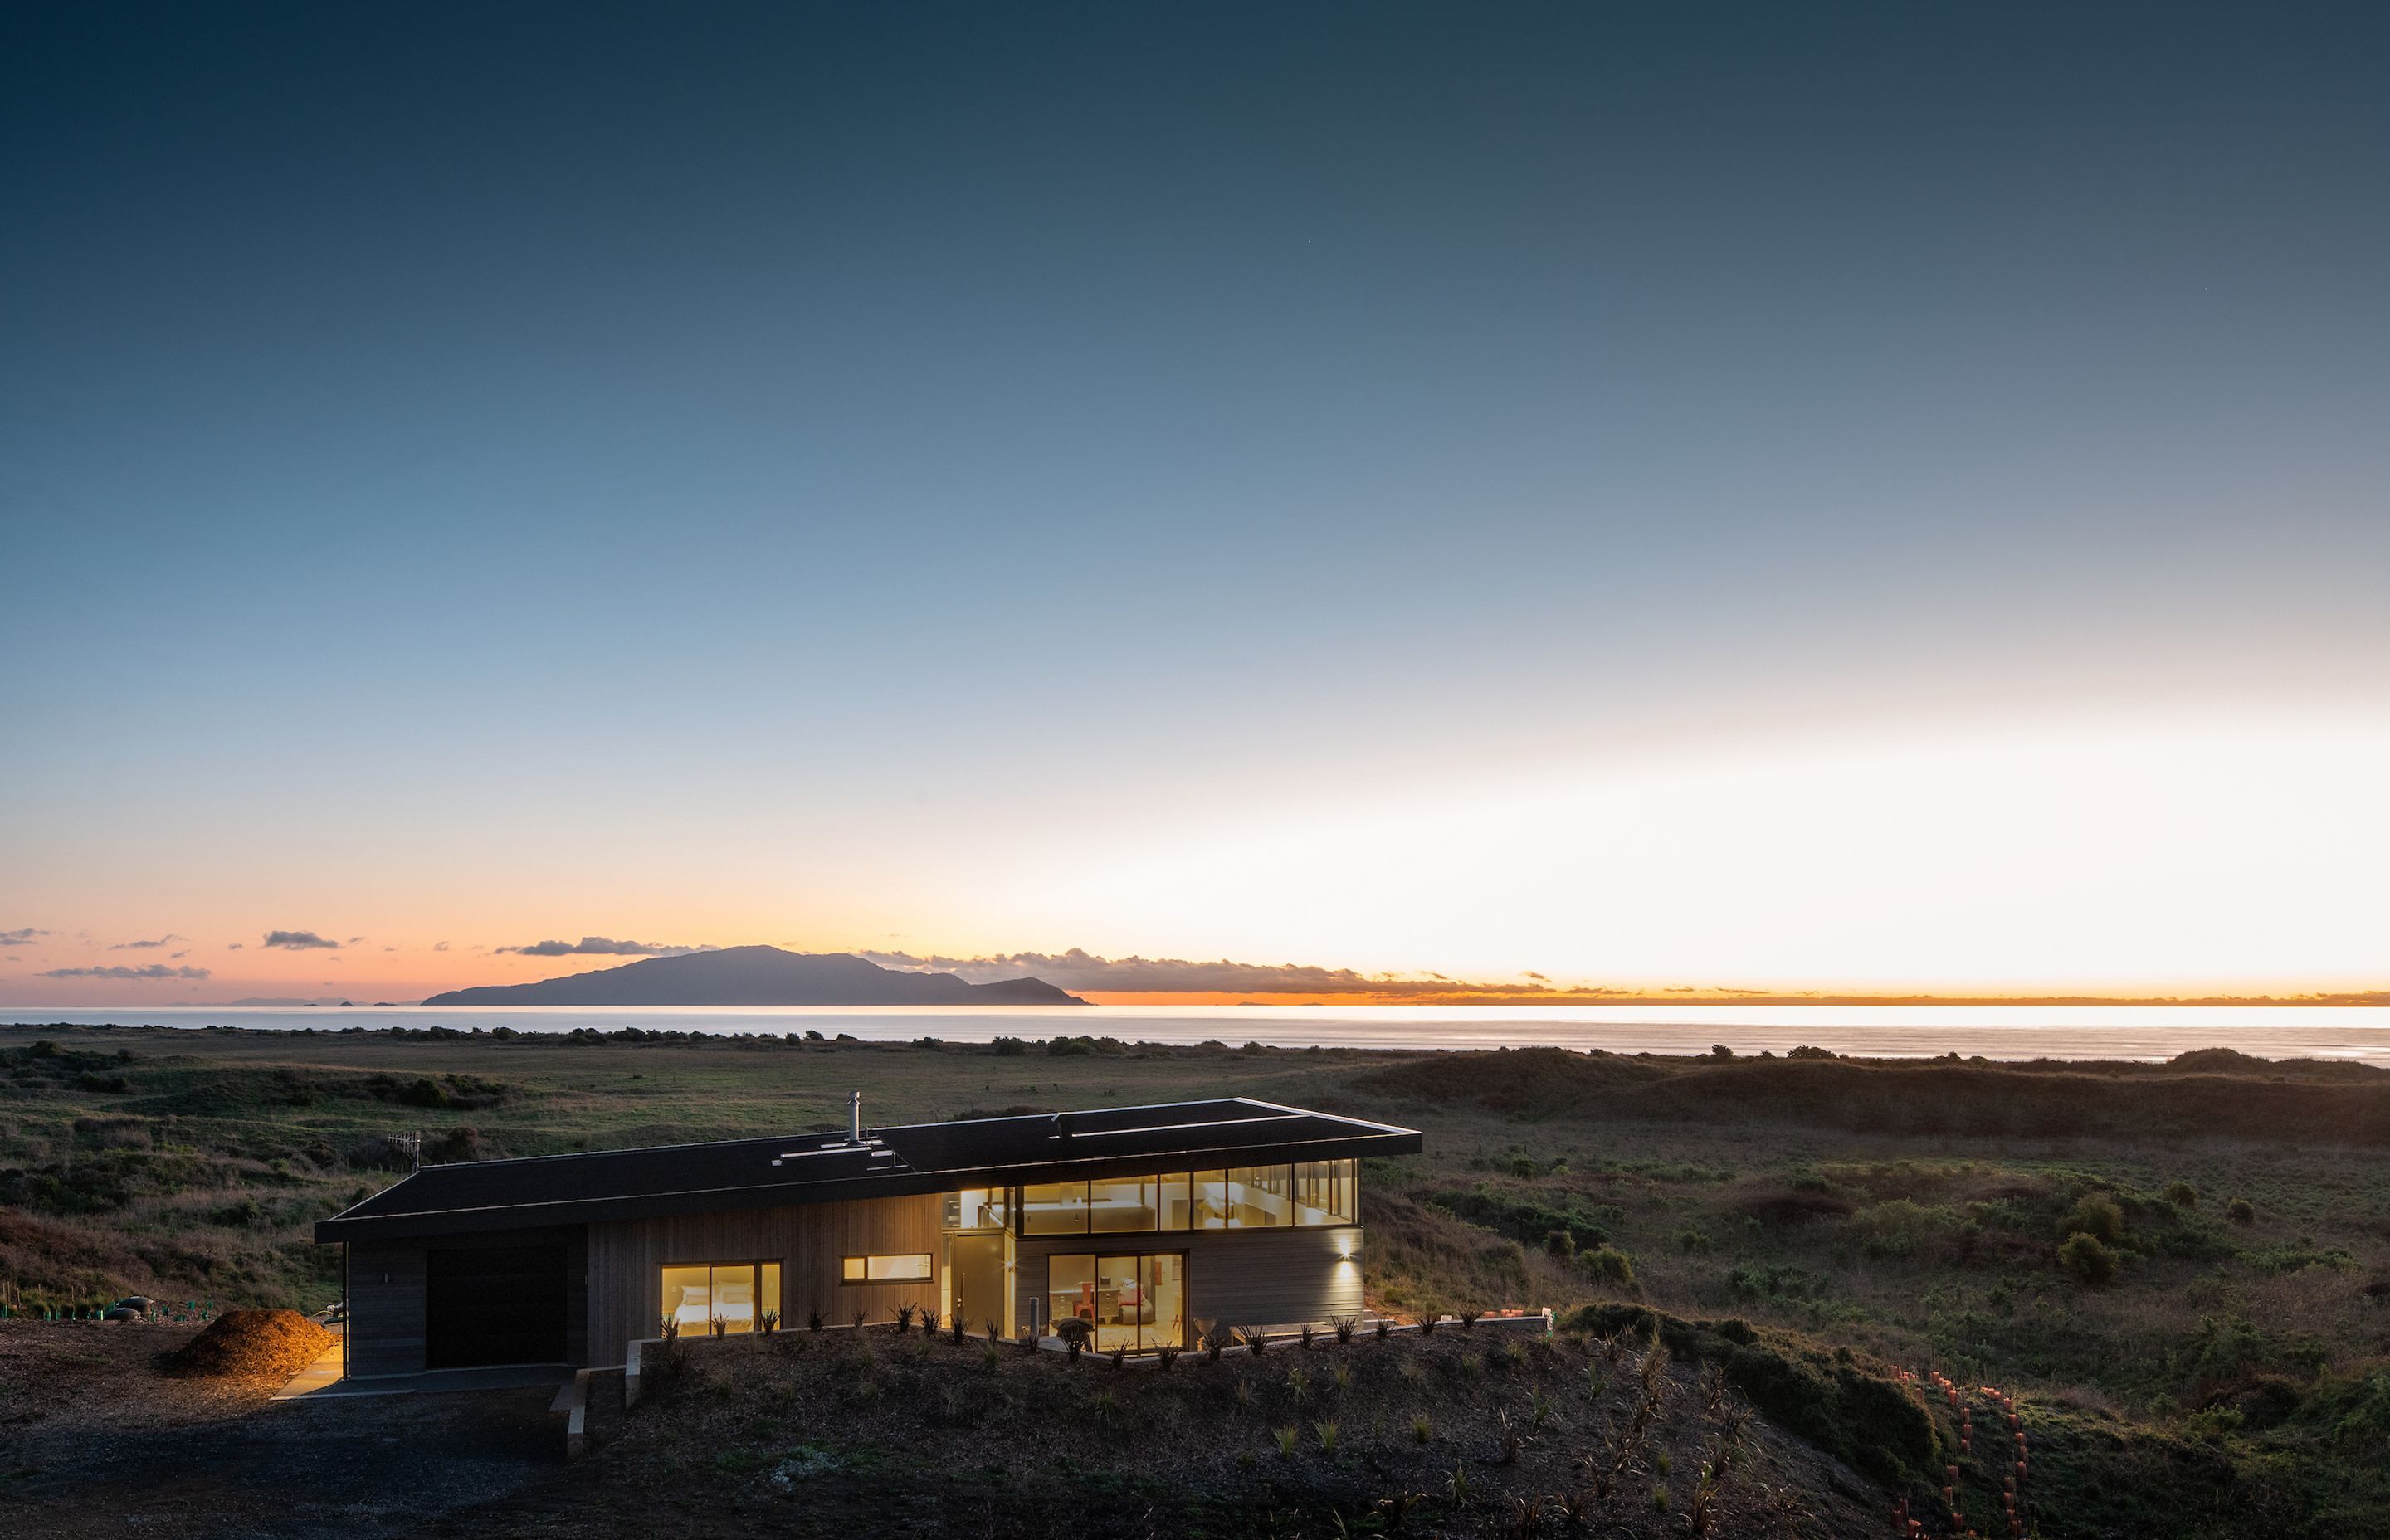 Situated just 300m from the water's edge at Te Horo Beach, this house has been designed so that it can transition from being a holiday house to a full-time residence.